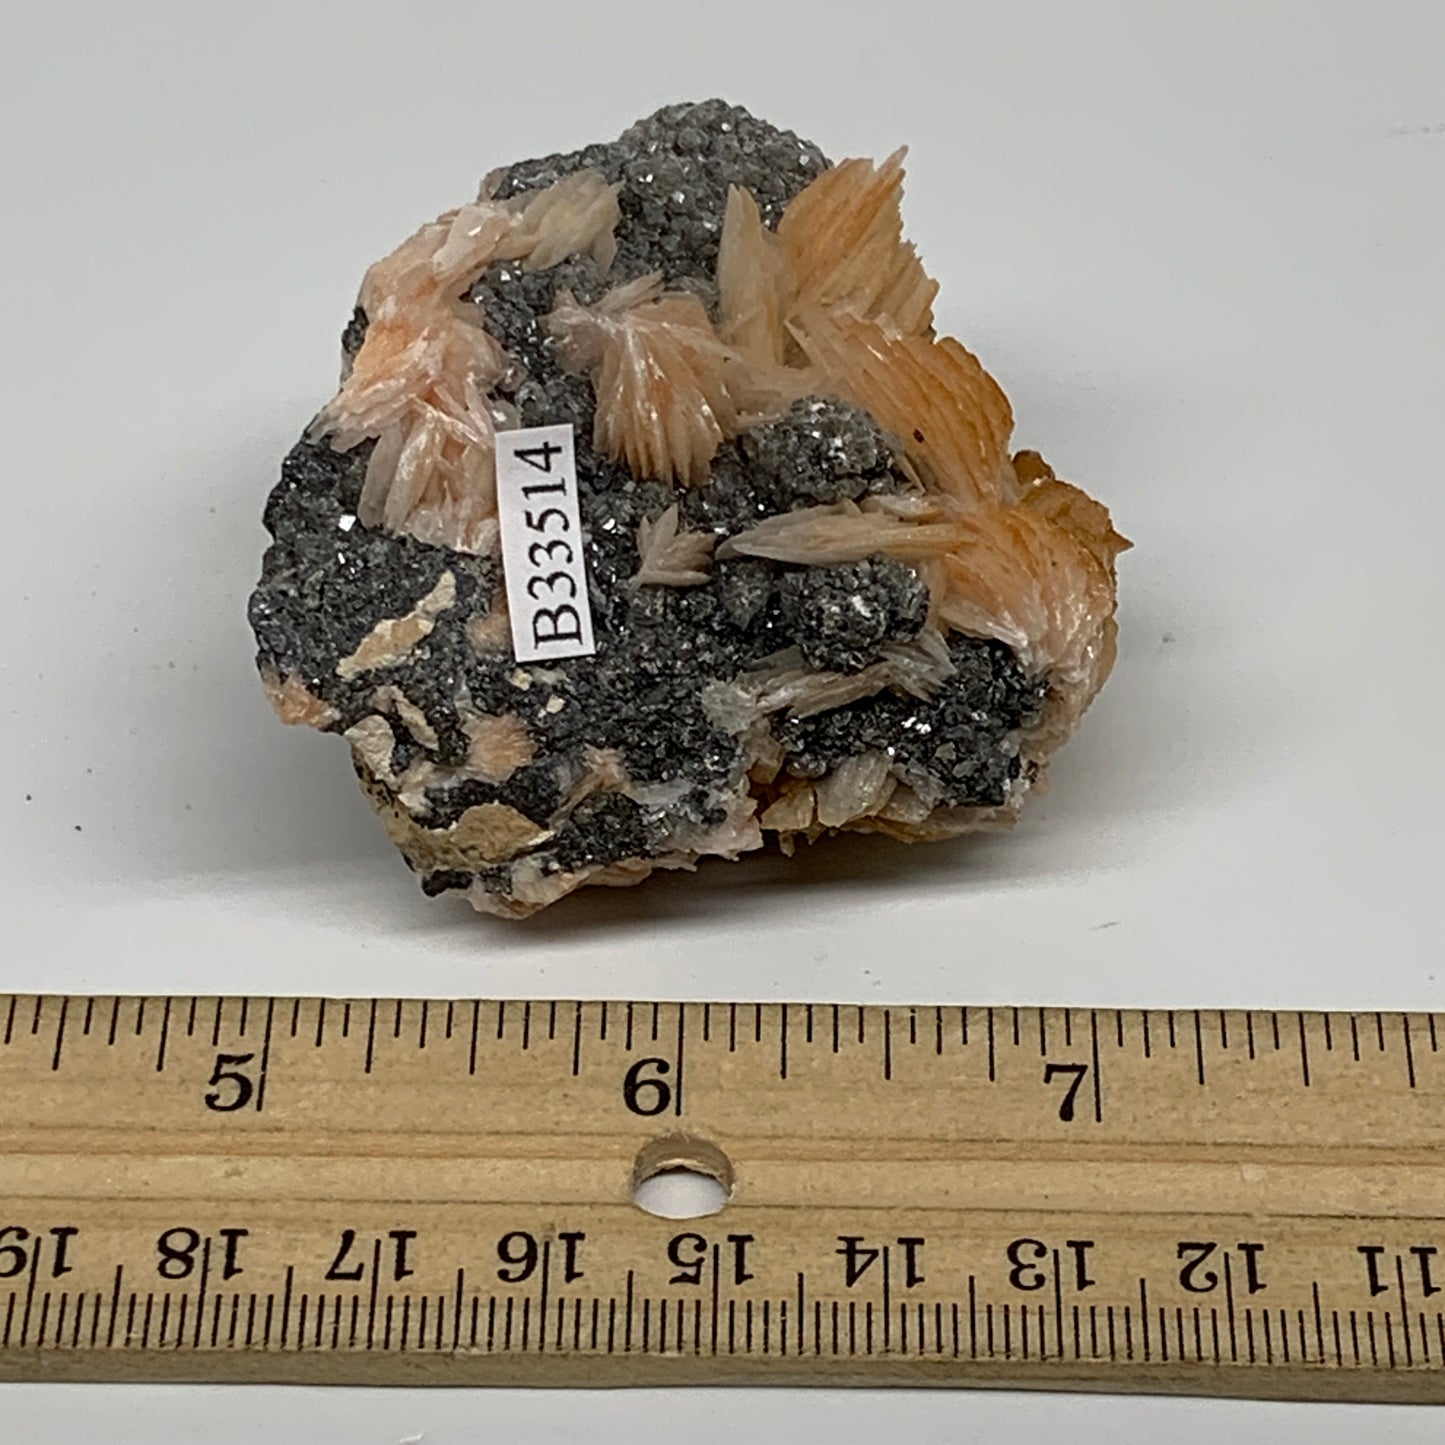 0.29 lbs, 2.1"x2.2"x1.4", Barite with Cerussite on Galena Mineral Specimen, B33514